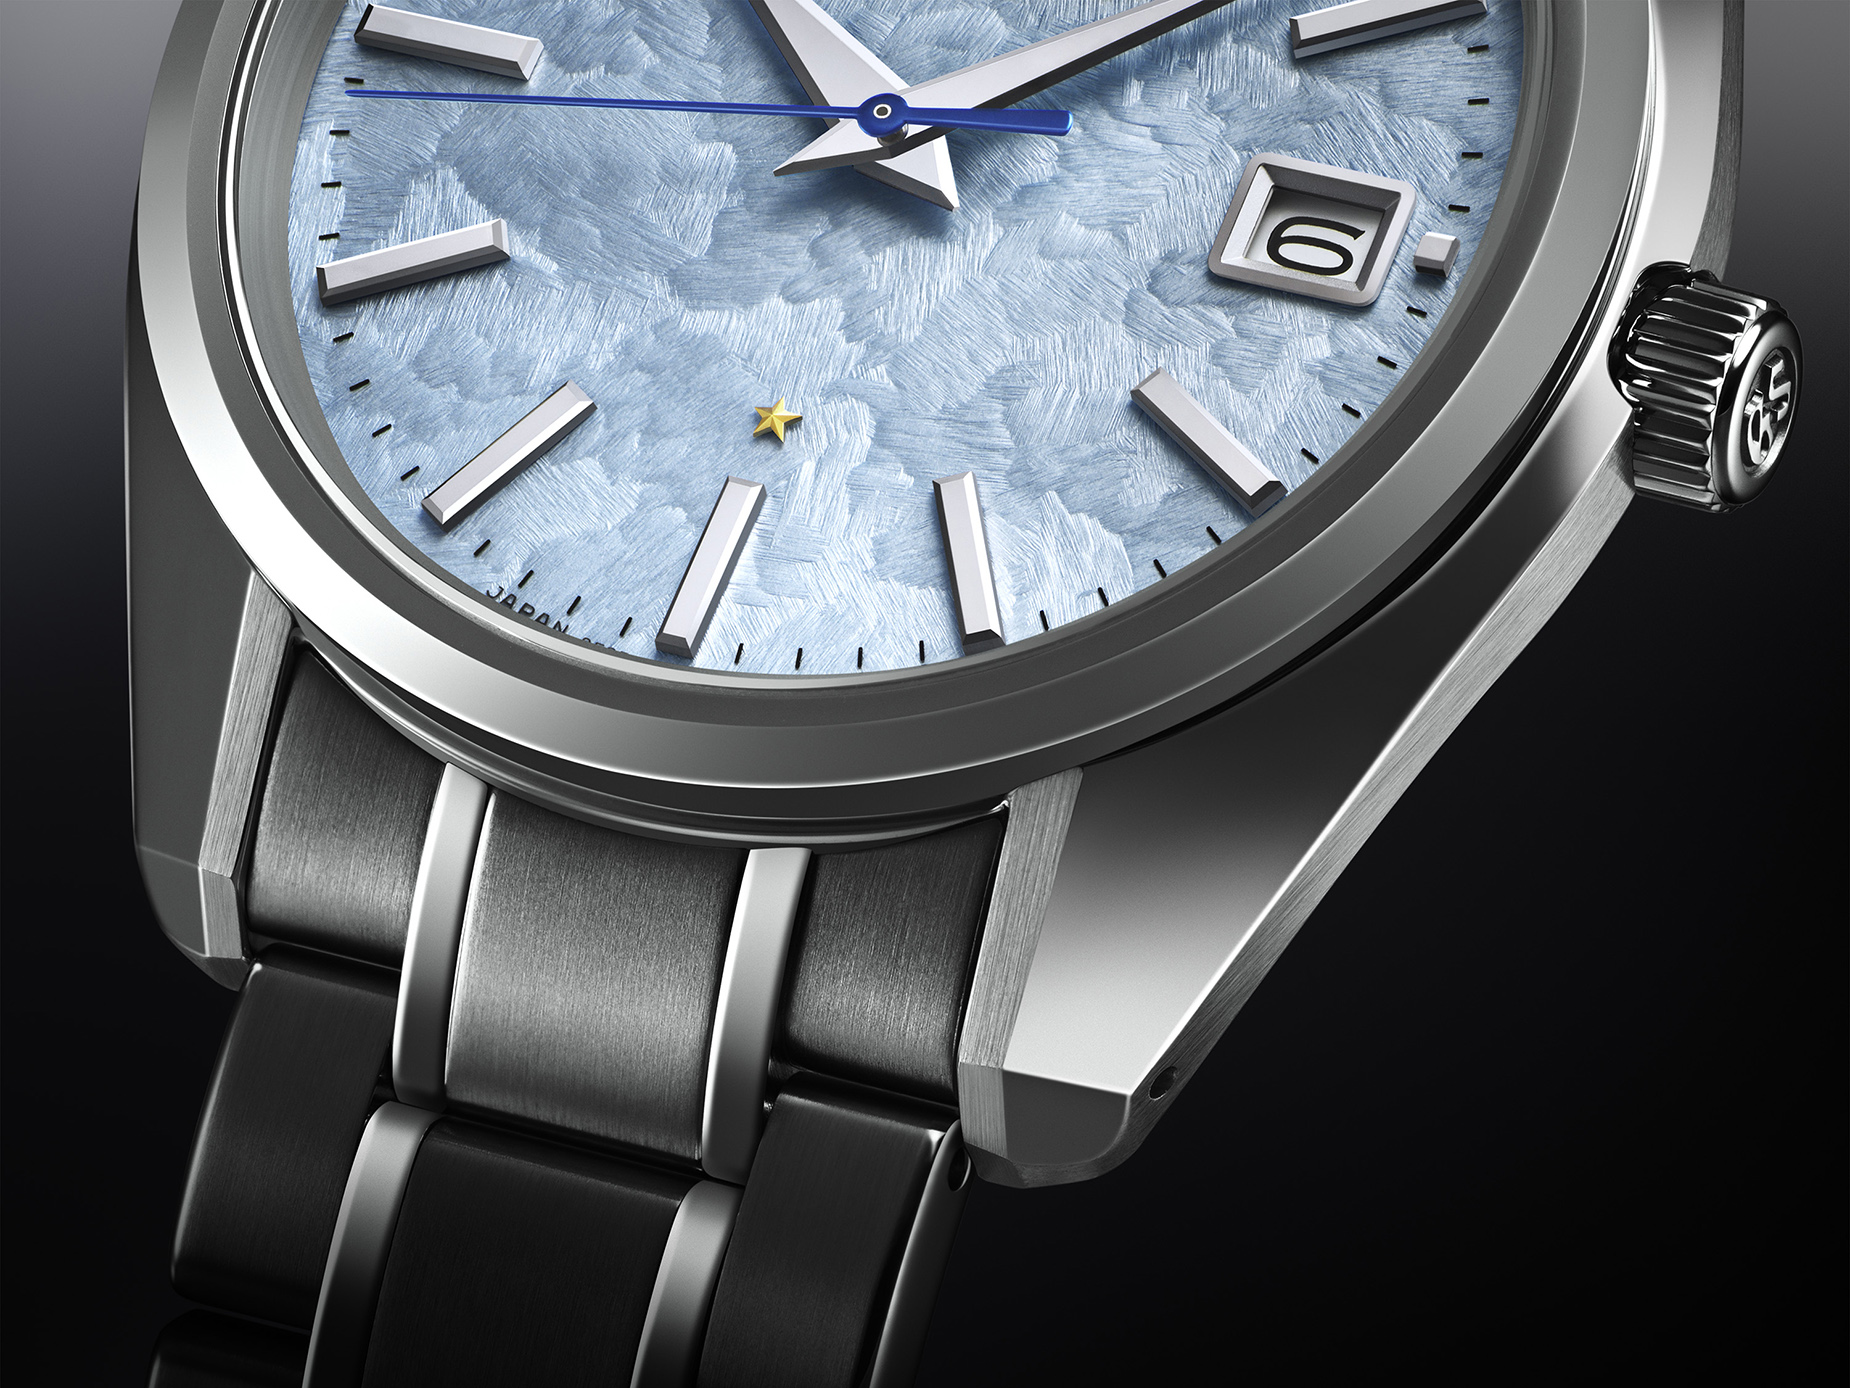 The 55th anniversary of the 44GS design is celebrated in a watch inspired  by the sea of clouds in Shinshu. | Grand Seiko